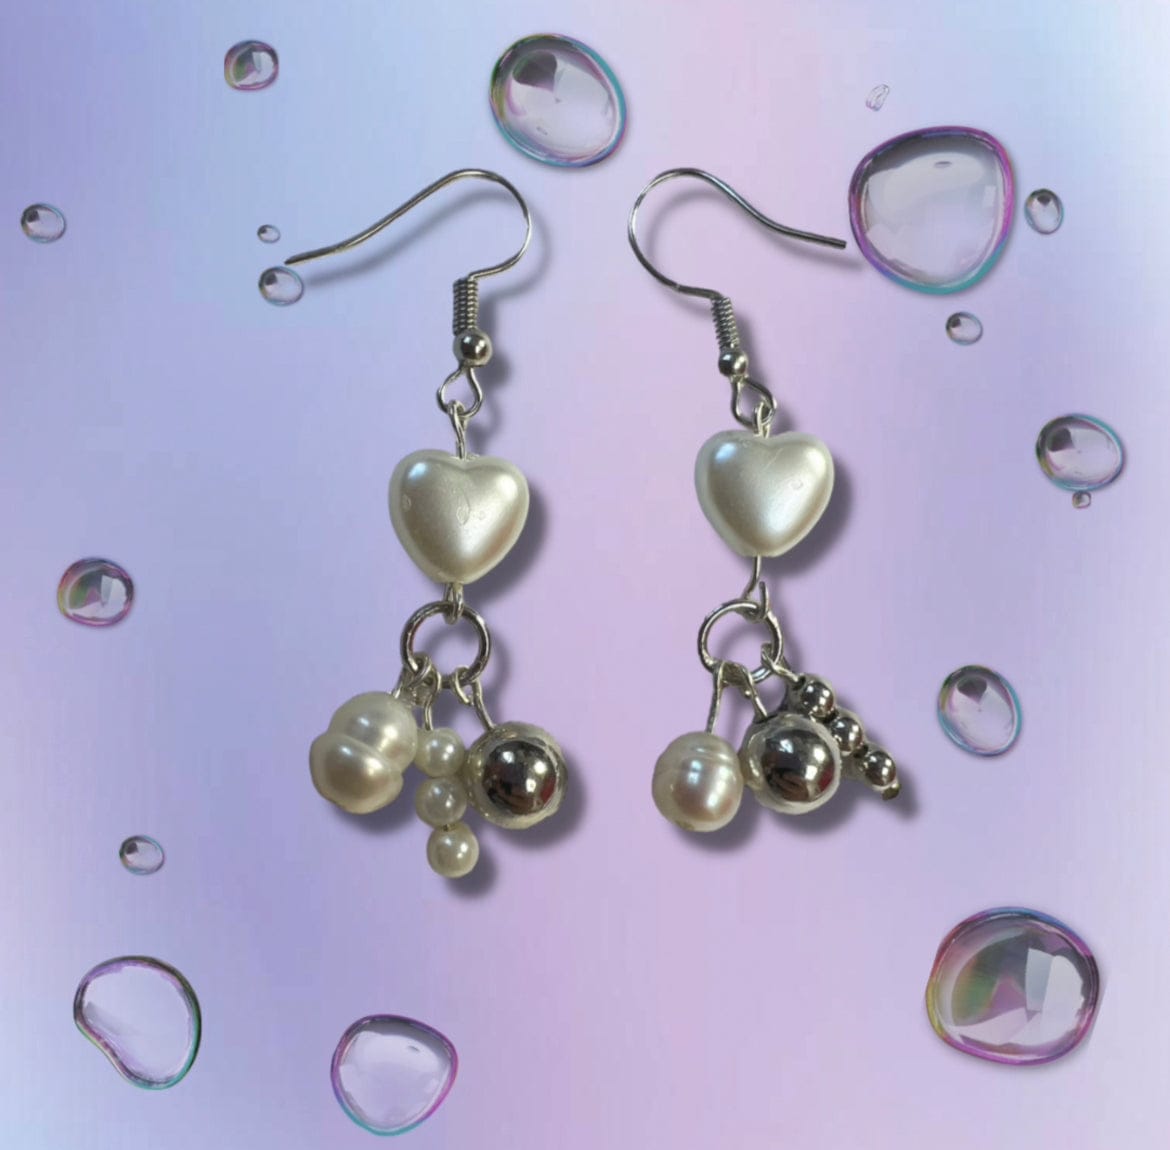 These earrings are embellished with pearl bubble hearts. Attached to the heart there is a steel ring. Dangling from the ring  are pearls, silver beads, and pearl beads.